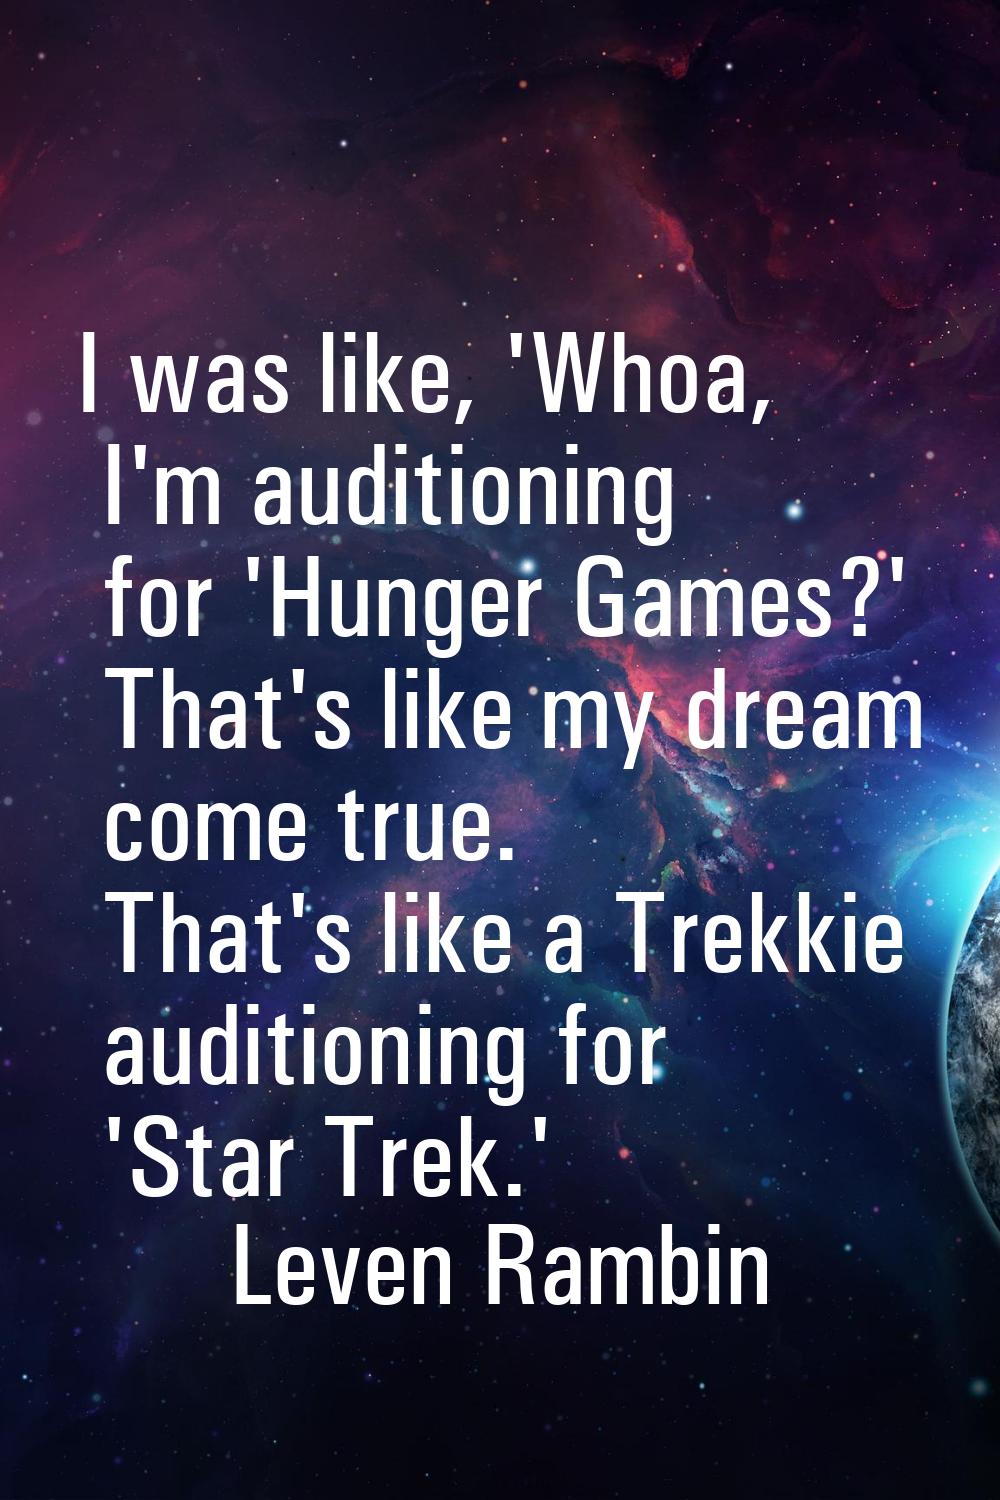 I was like, 'Whoa, I'm auditioning for 'Hunger Games?' That's like my dream come true. That's like 